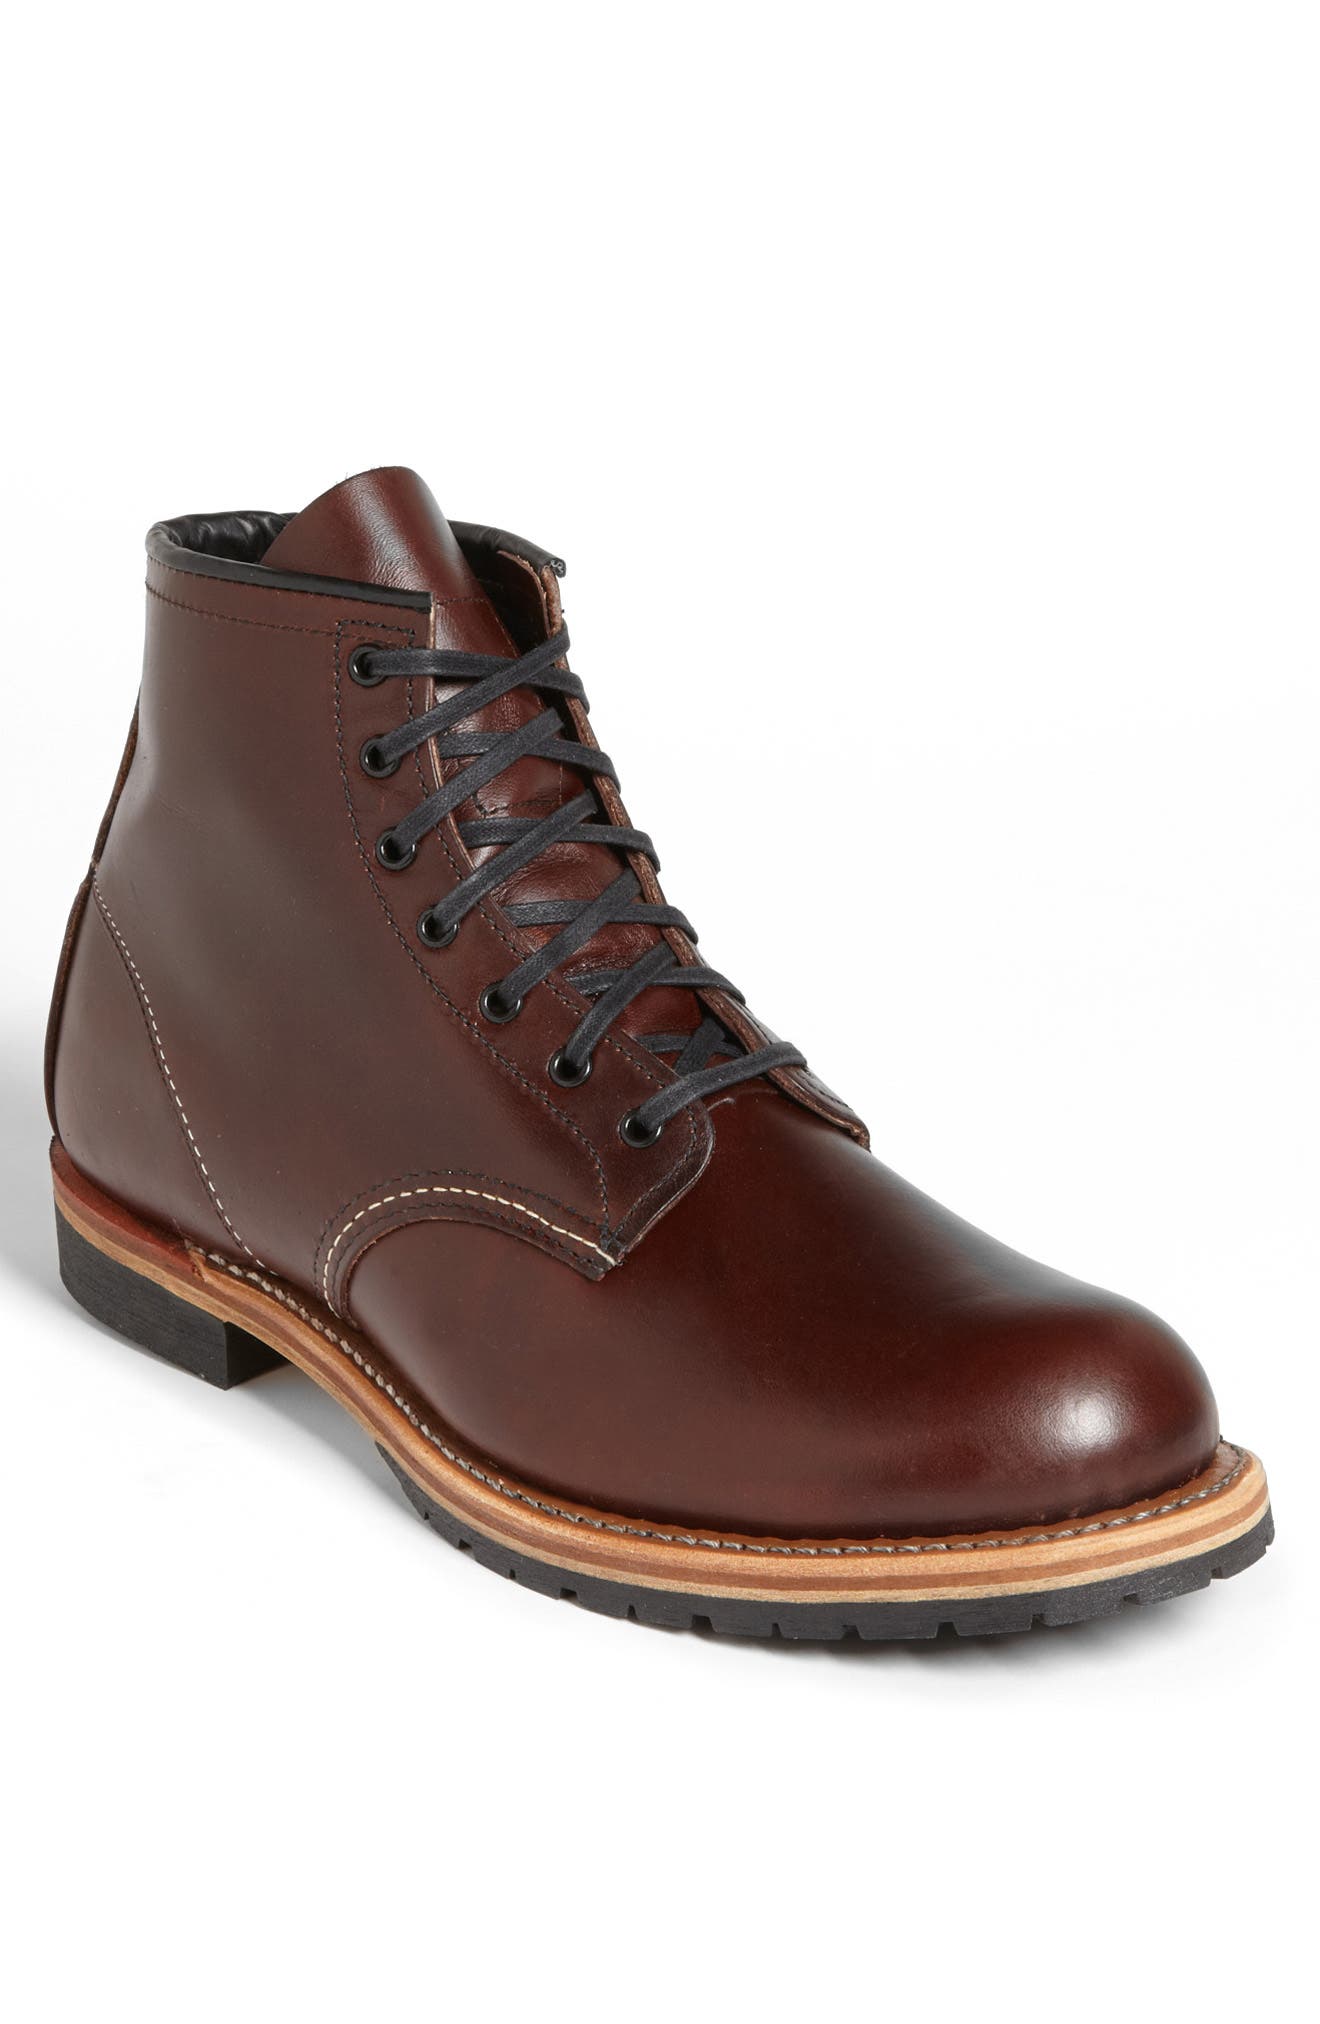 red wing heritage factory seconds